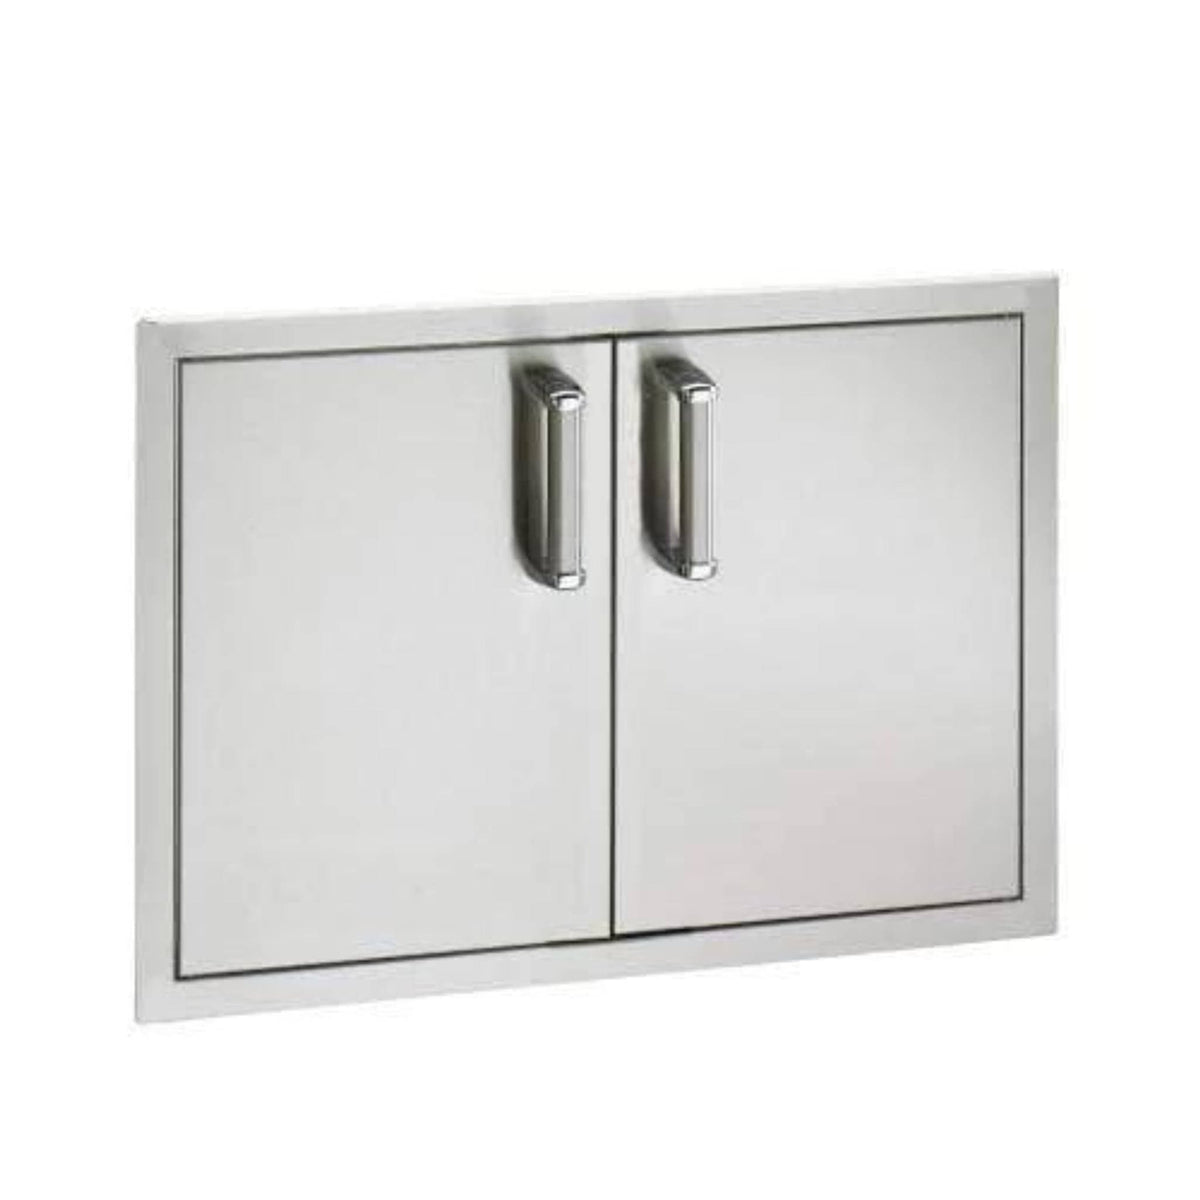 Fire magic Double Doors with Trash Tray &amp; Dual Drawers 53930SC-12